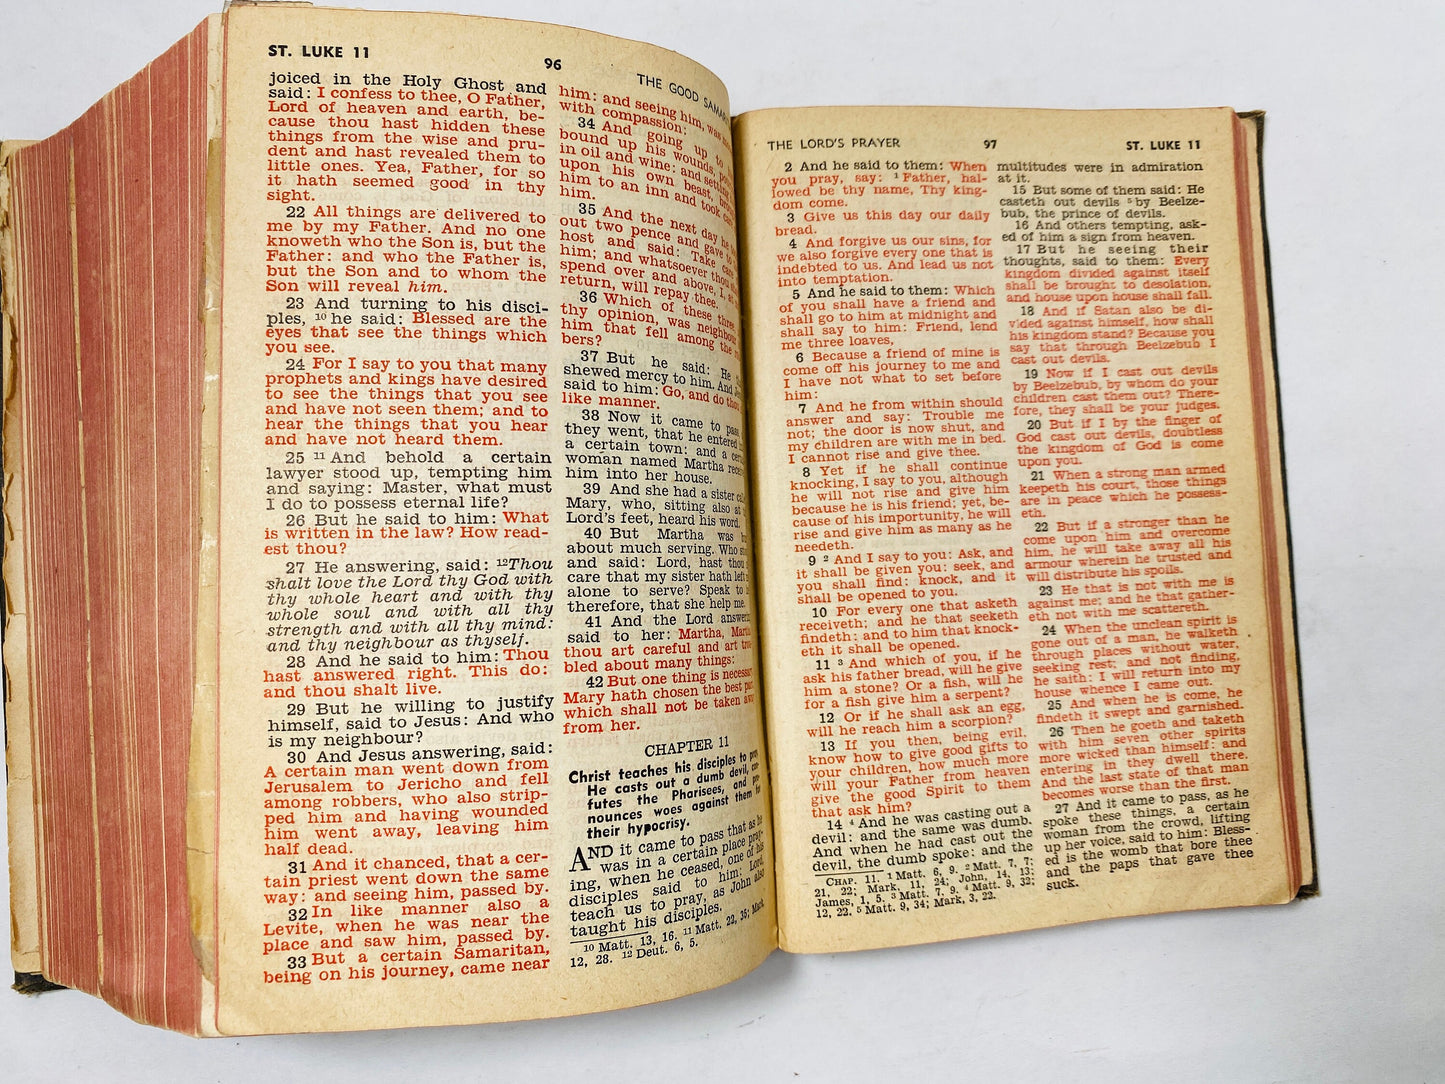 Holy Bible Red Letter Edition Translated from the Latin Vulgate and Diligently Compared with the Hebrew, Greek Douay-Rheims Bible New York